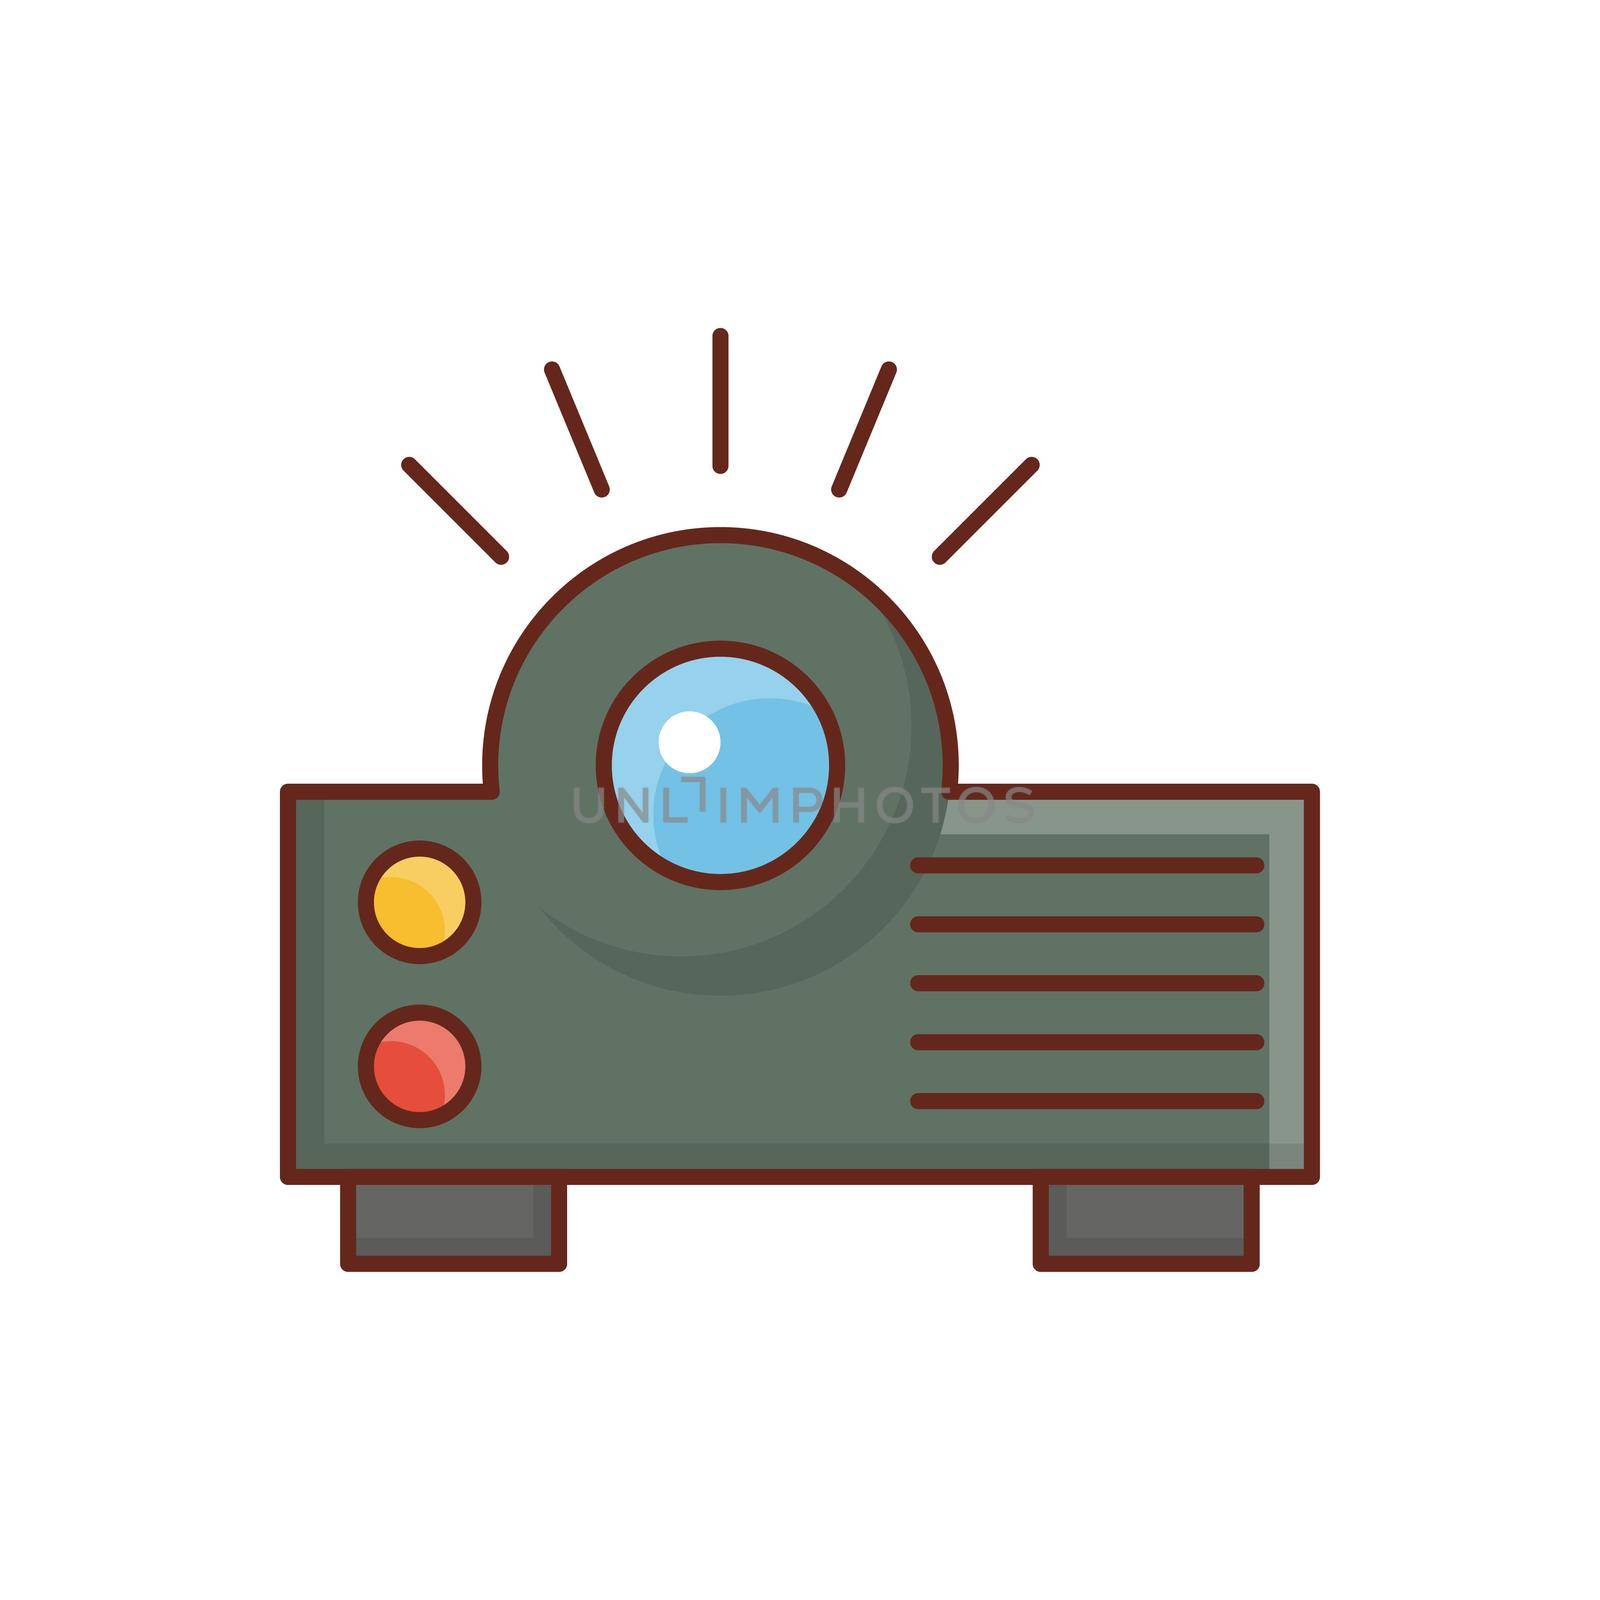 projector by FlaticonsDesign